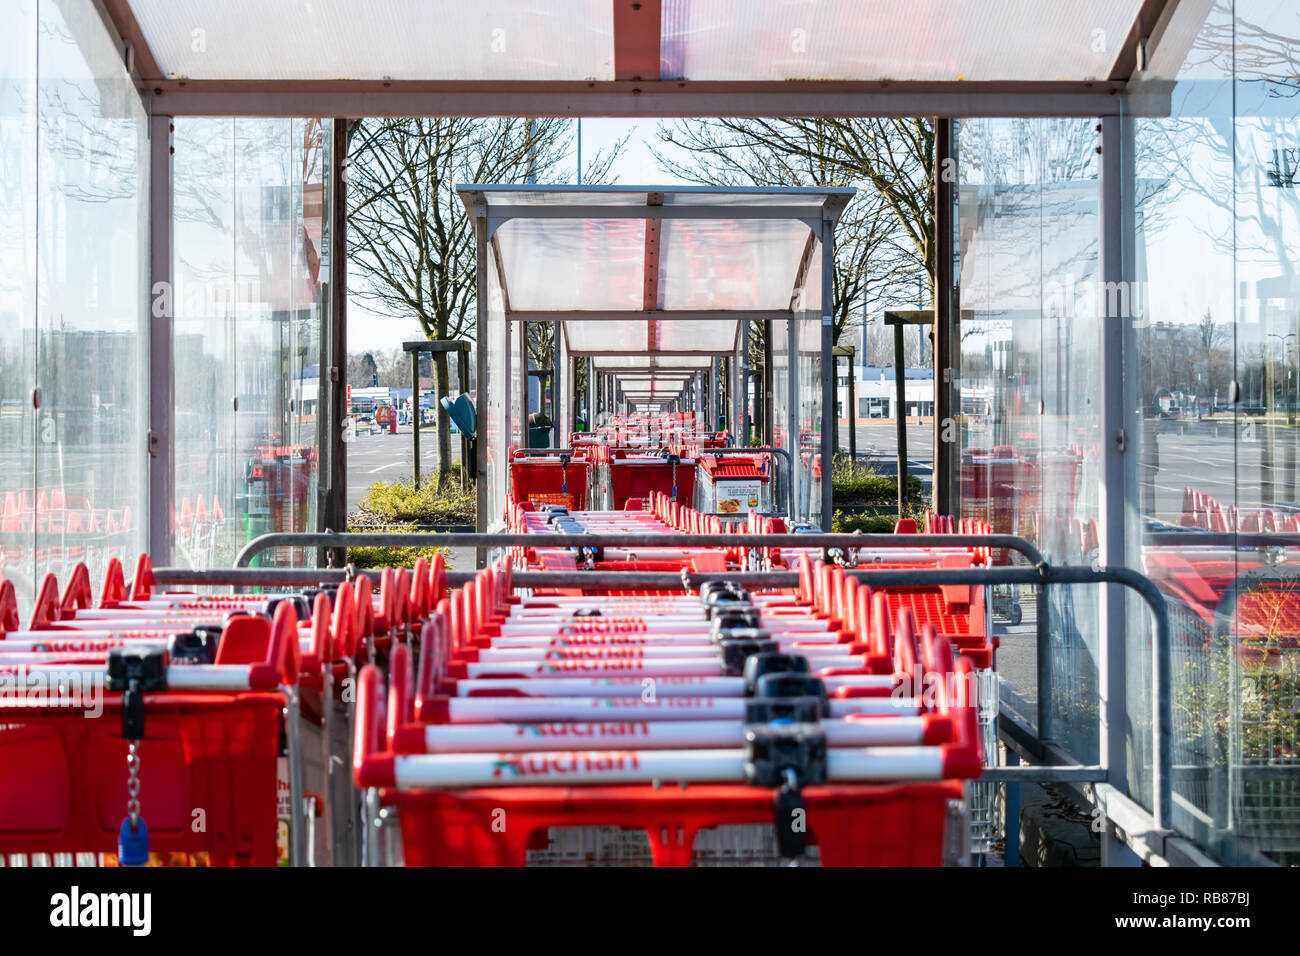 Roncq,FRANCE-February 25,2018: Close-up shopping trolleys Auchan hypermarket.Auchan is a French international supermarket chain. Stock Photo